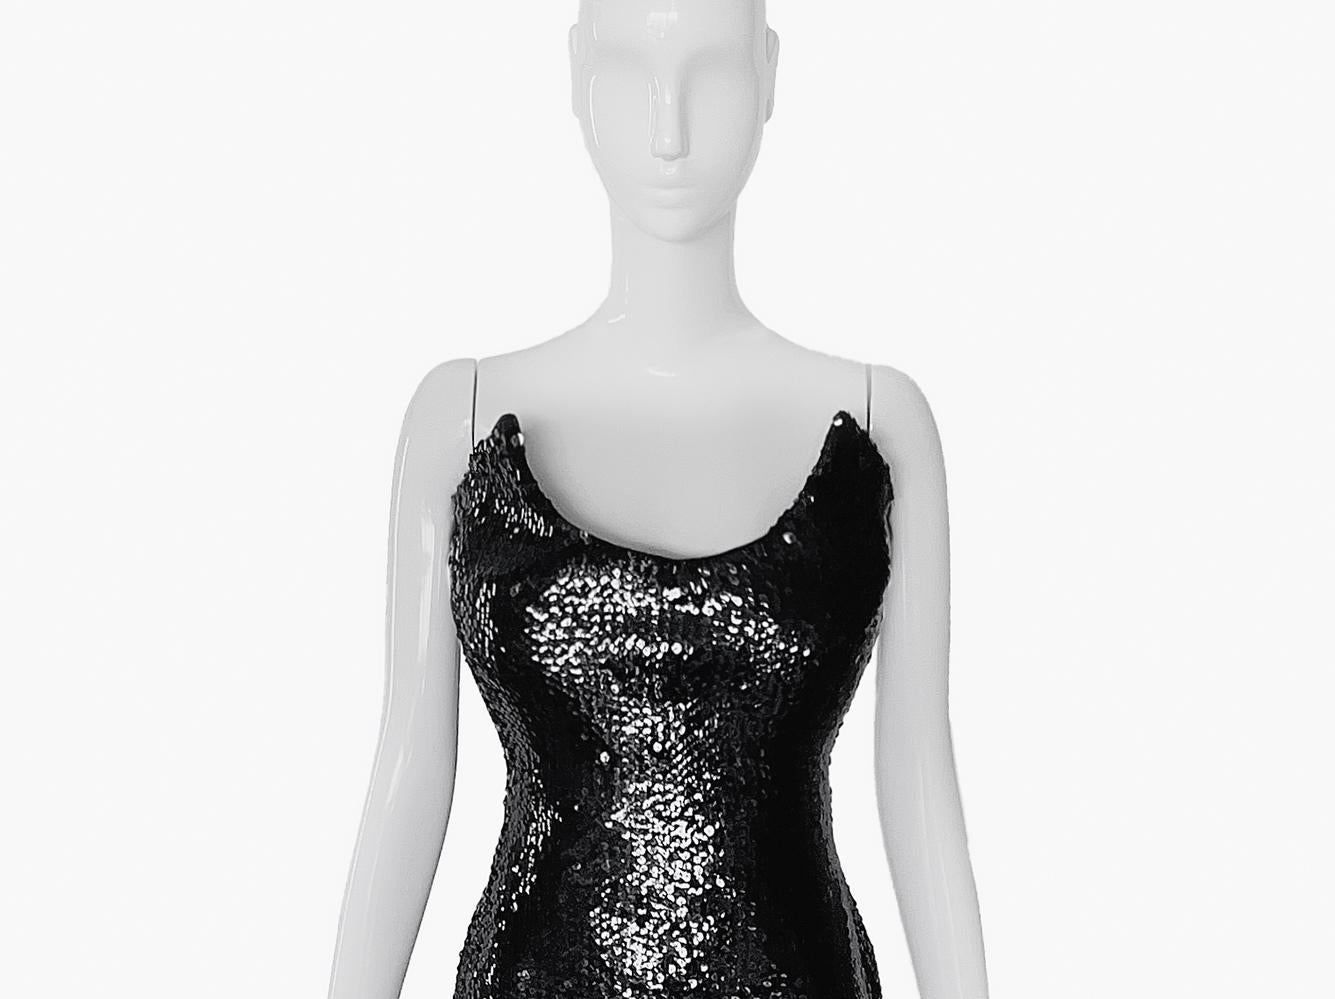 Showstopper Thierry Mugler Dramatic Evening Gown Black Sequin For Sale 1